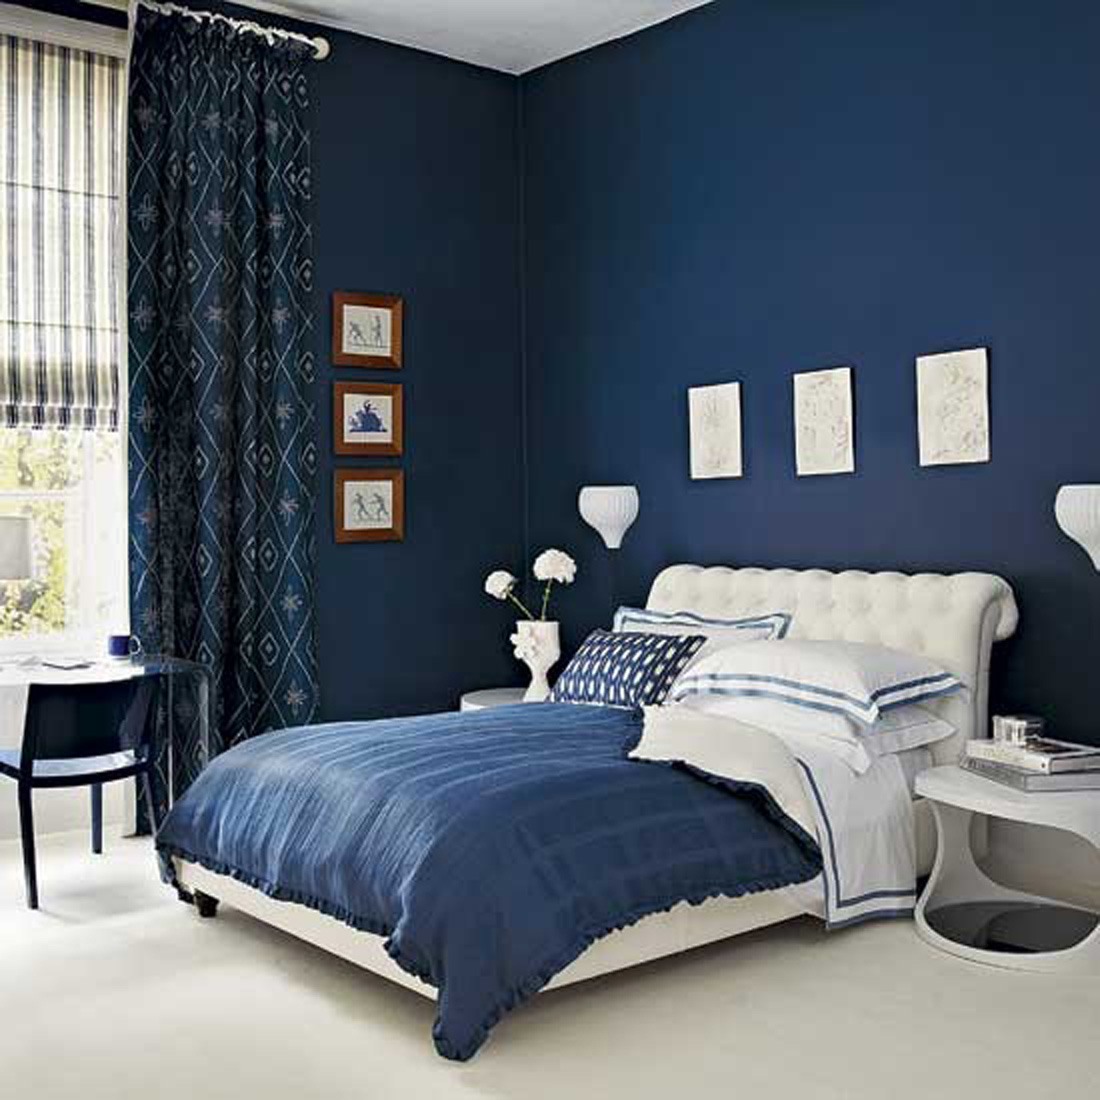 target chapter navy blue accent wall bedroom makeover emily table chair cherry dining room and chairs ikea side cocktail sets changing leick recliner wedge end big sun umbrella